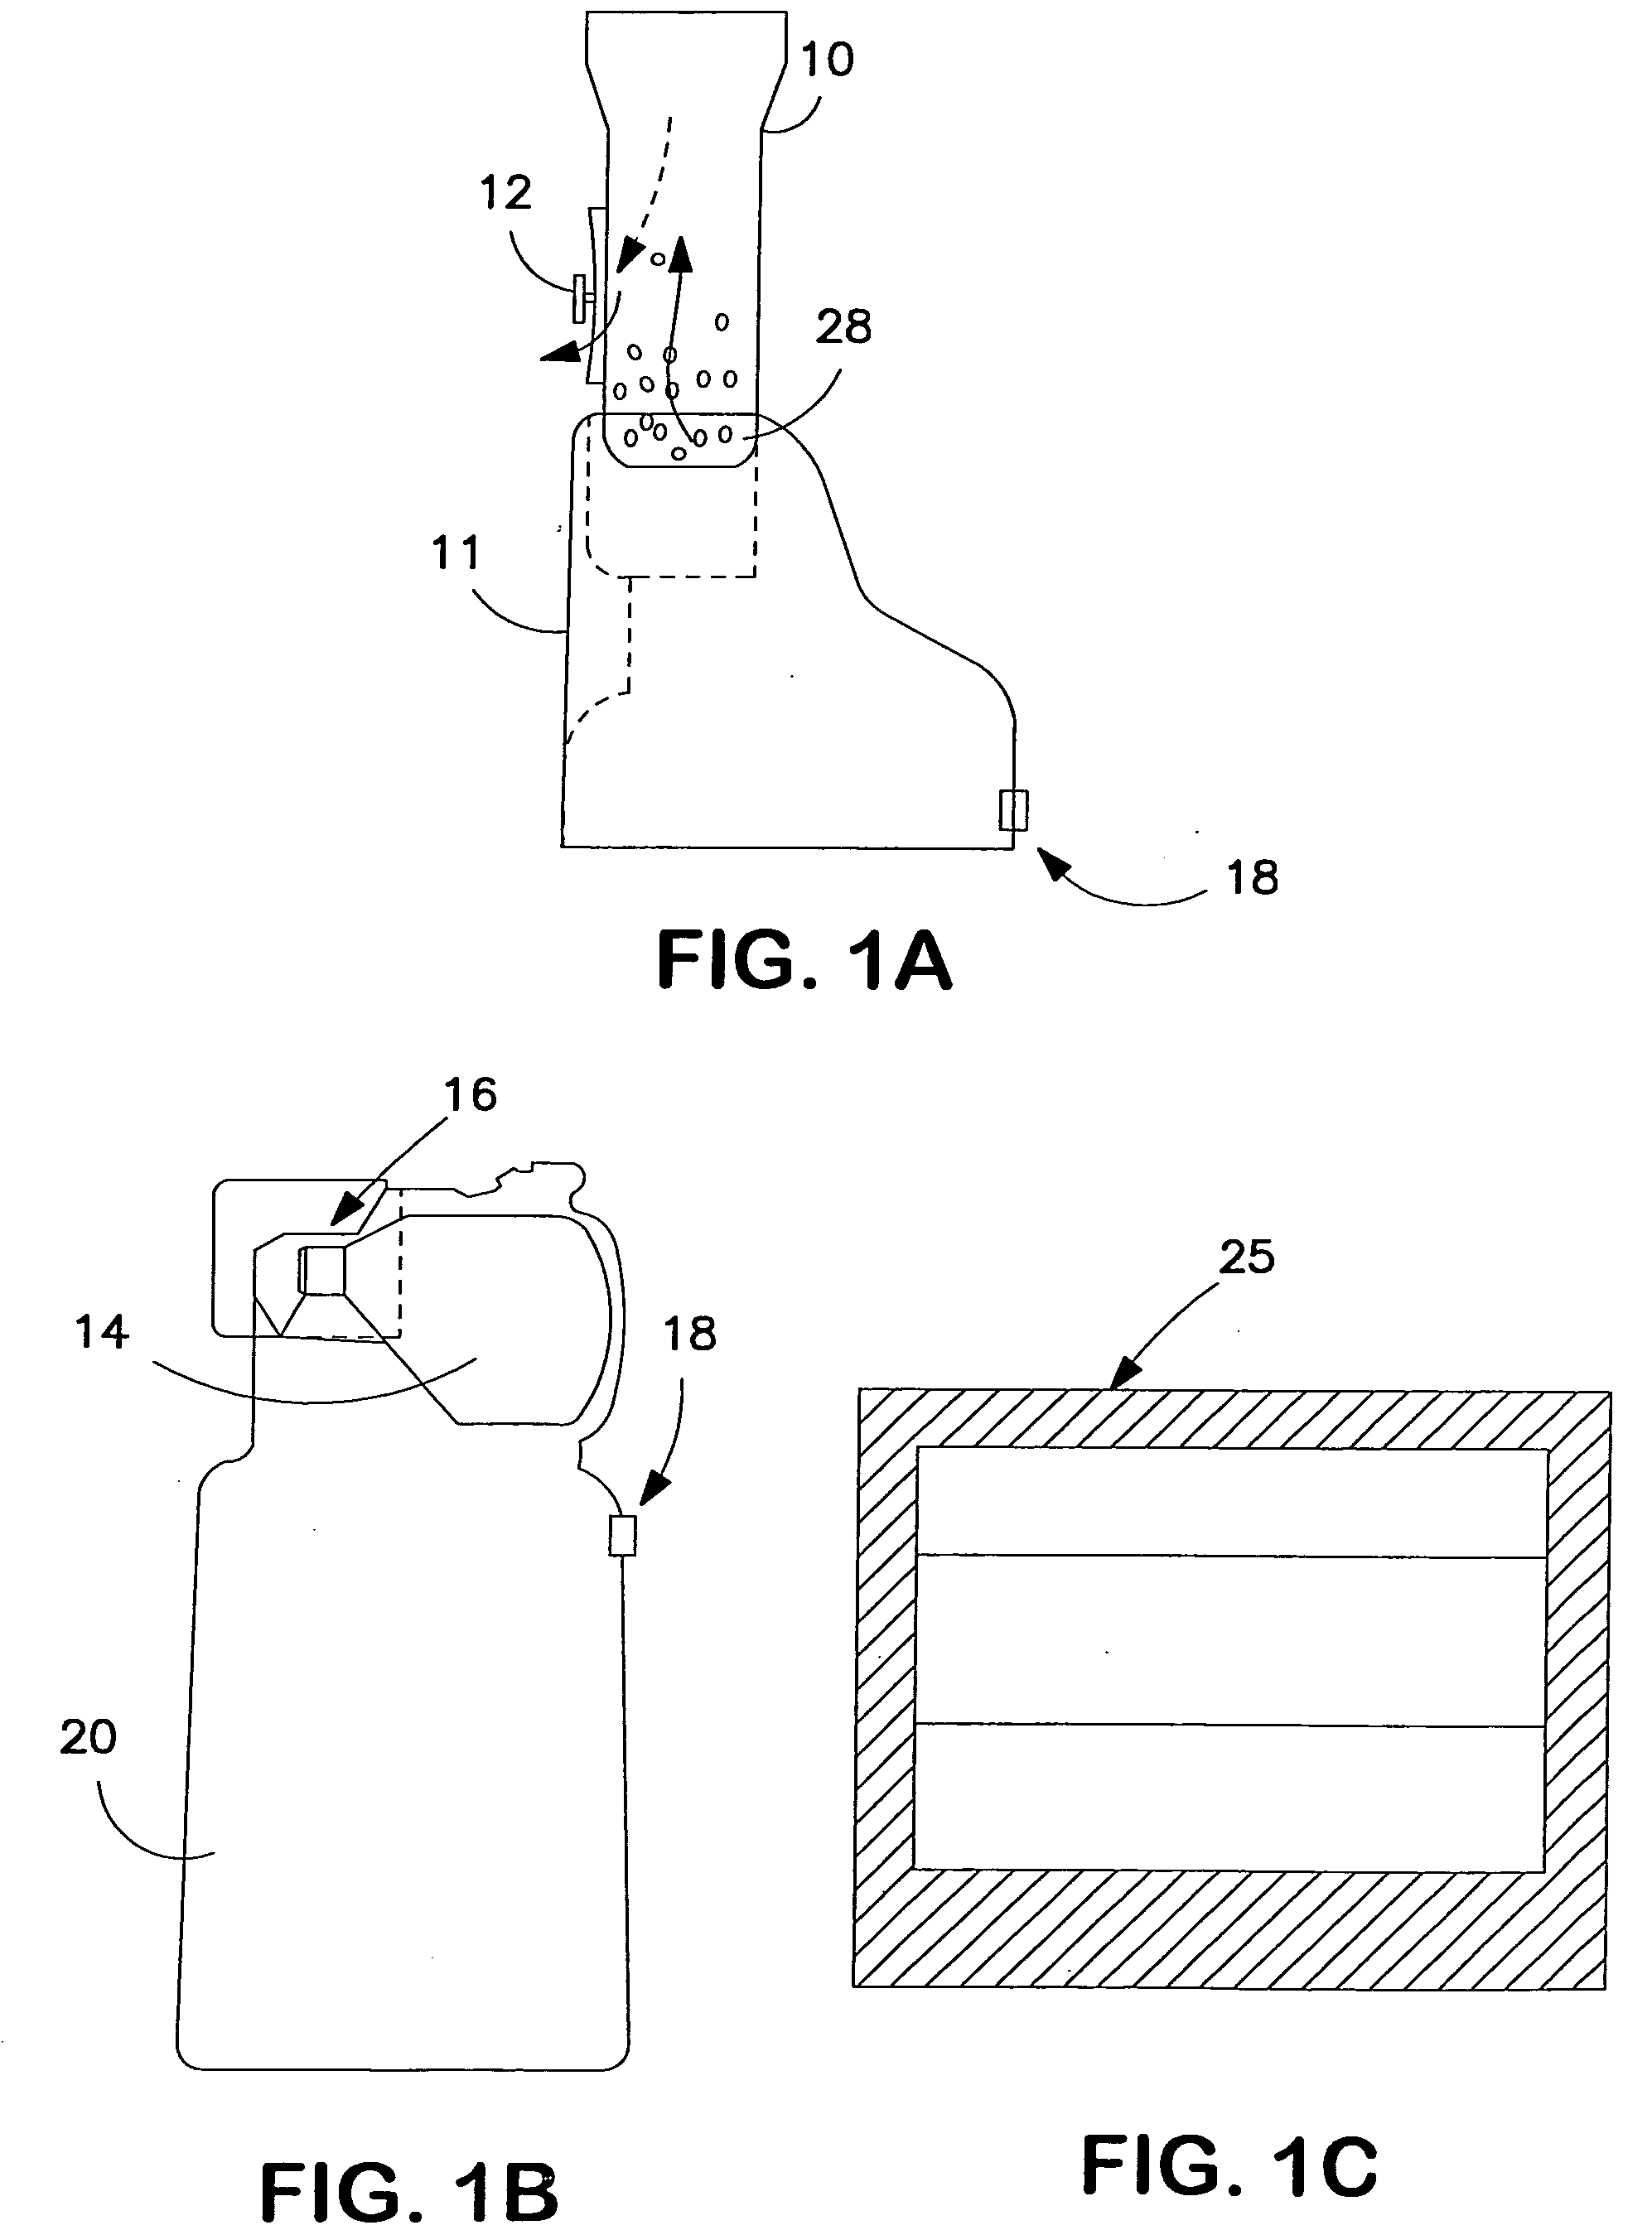 Devices for measuring inspiratory airflow